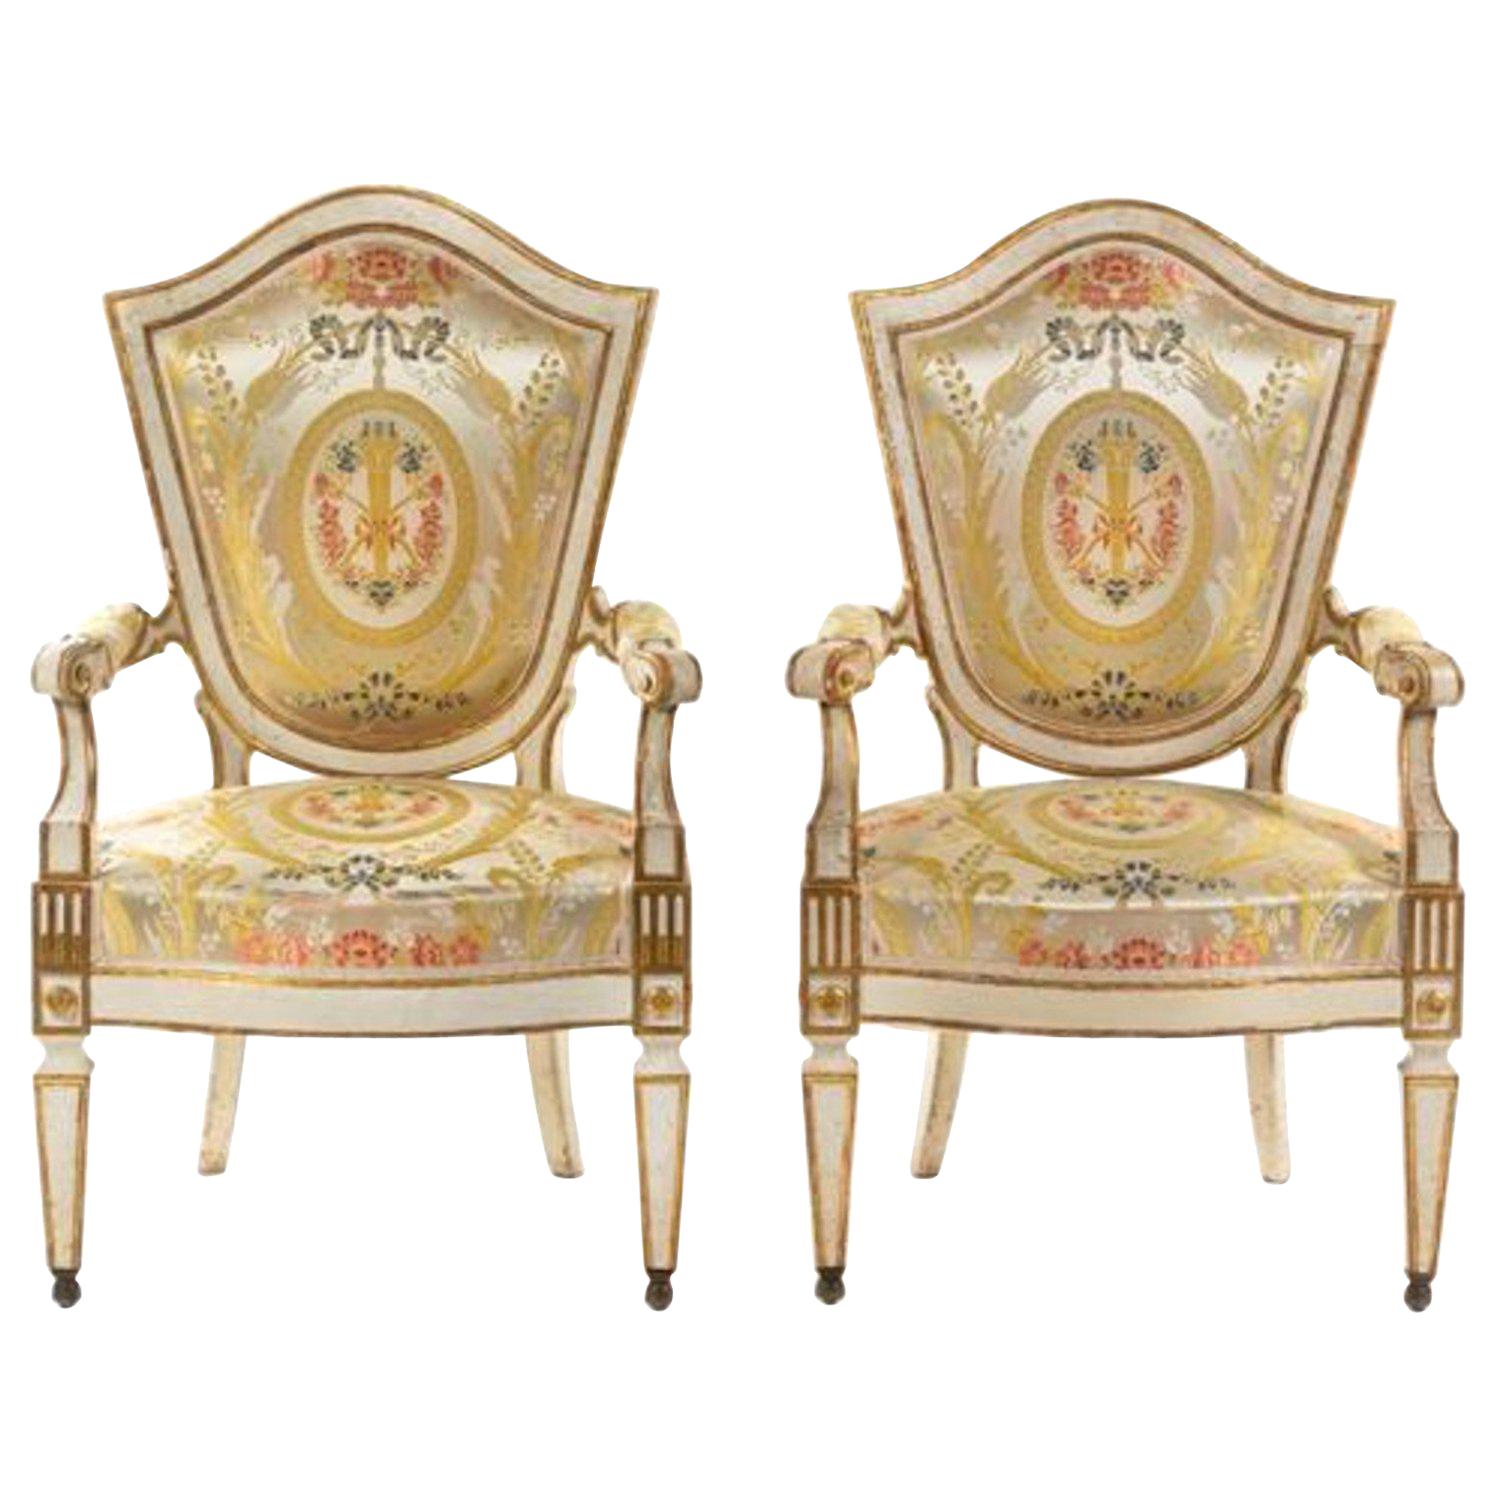 Important Pair of Italian Painted Fauteuils Florence, 18th Century For Sale